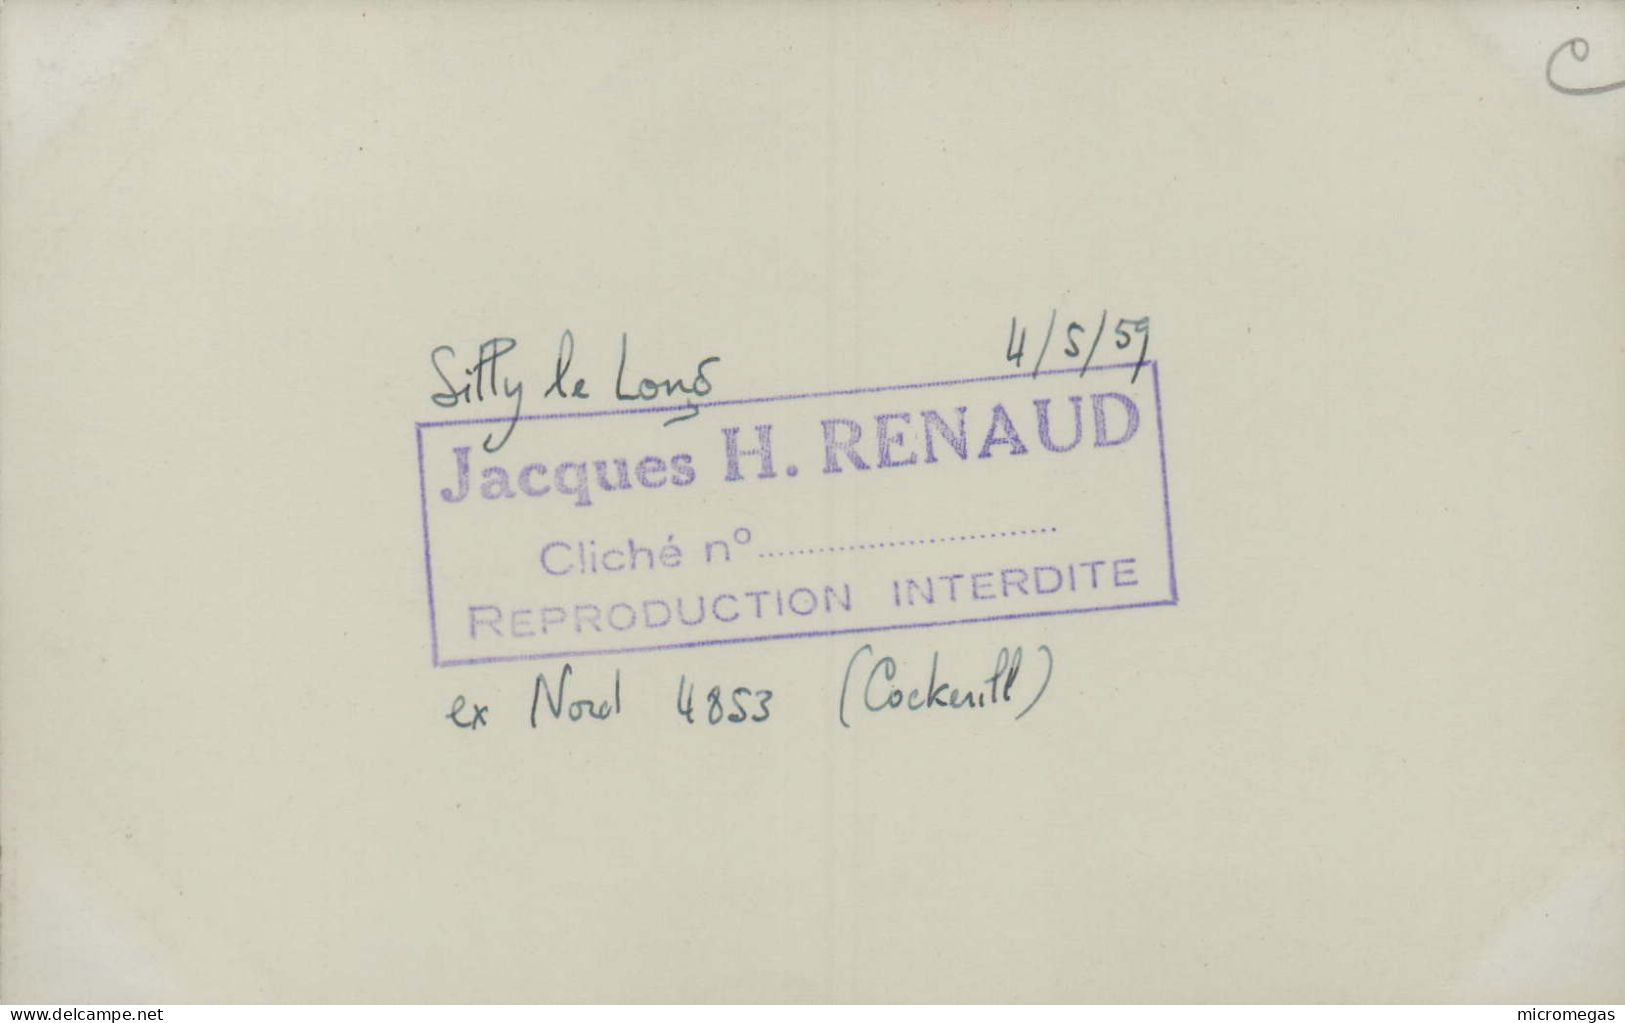 Silly-le-Long - Ex. Nord 4853 (Cockerill) - Cliché Jacques H. Renaud, 4-5-1959 - Treinen